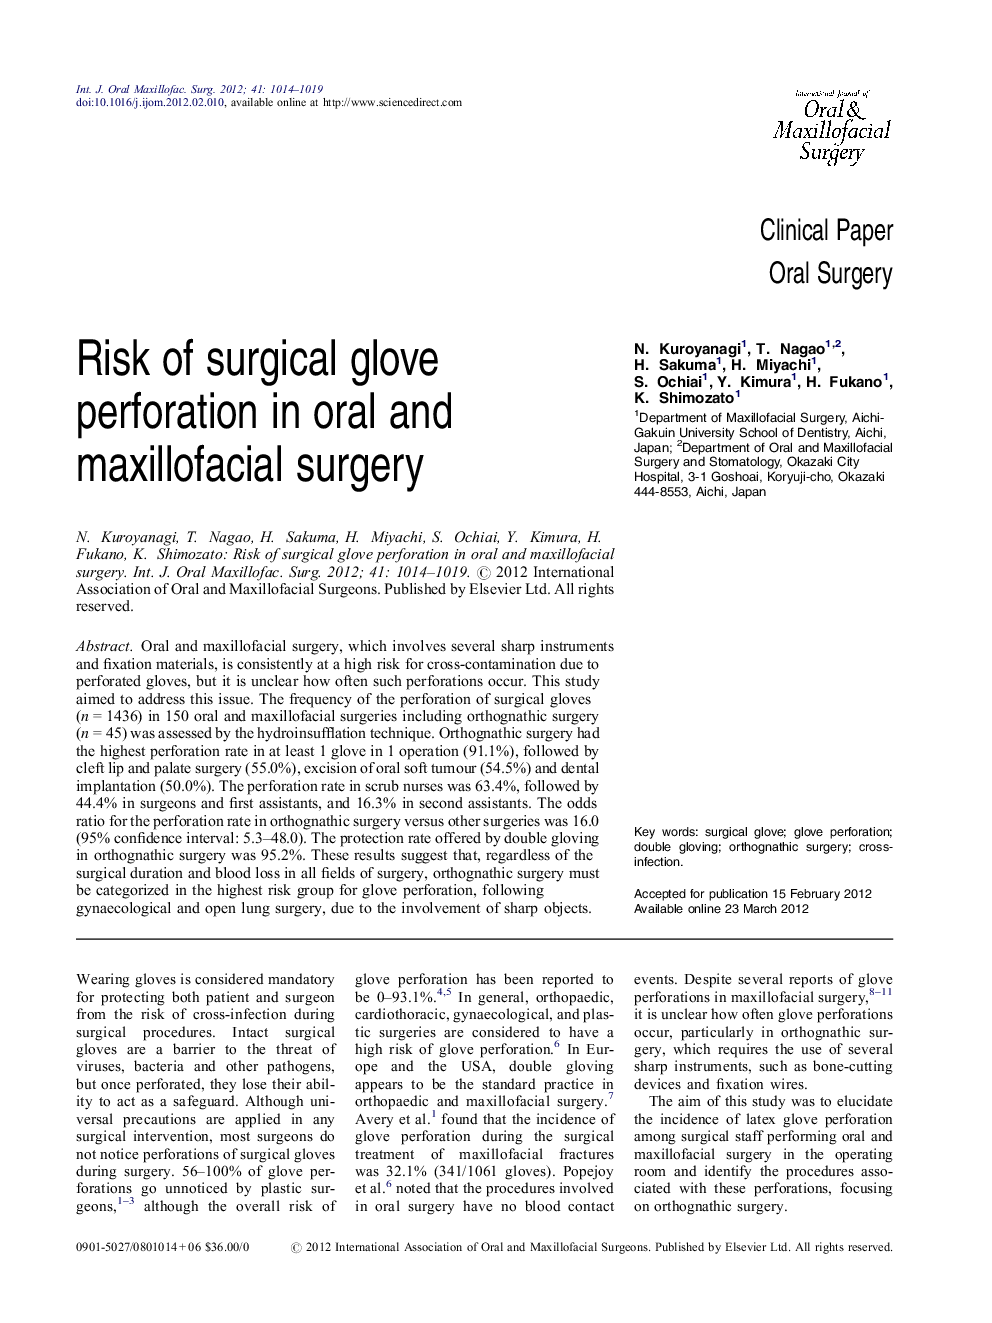 Risk of surgical glove perforation in oral and maxillofacial surgery